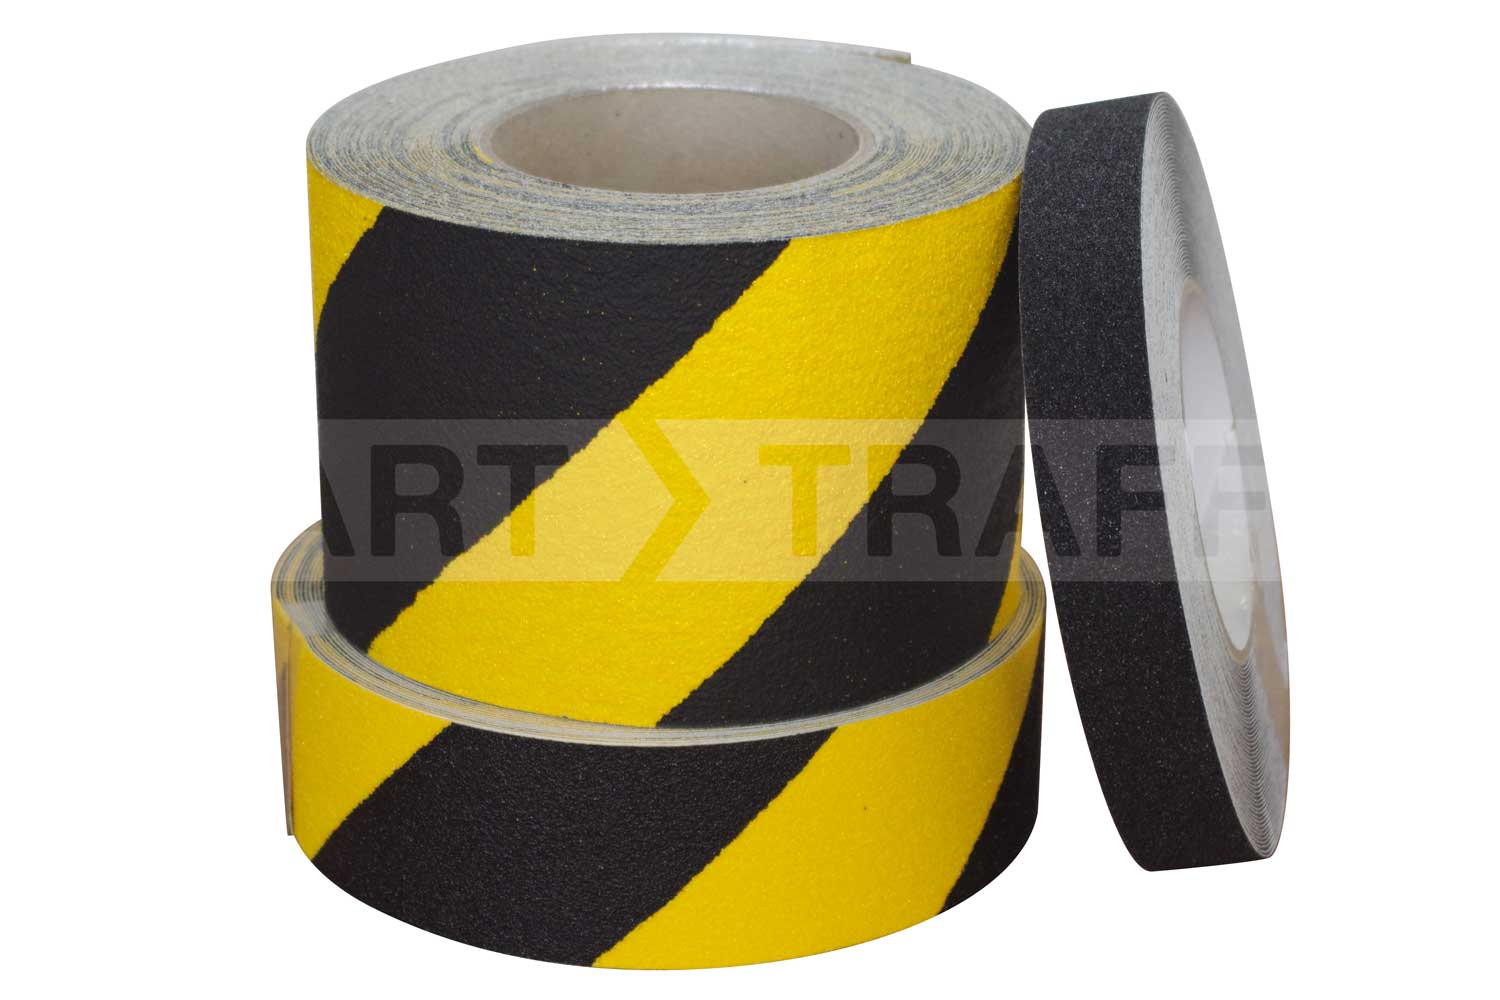 Choice of widths for Standard Anti-Slip tape